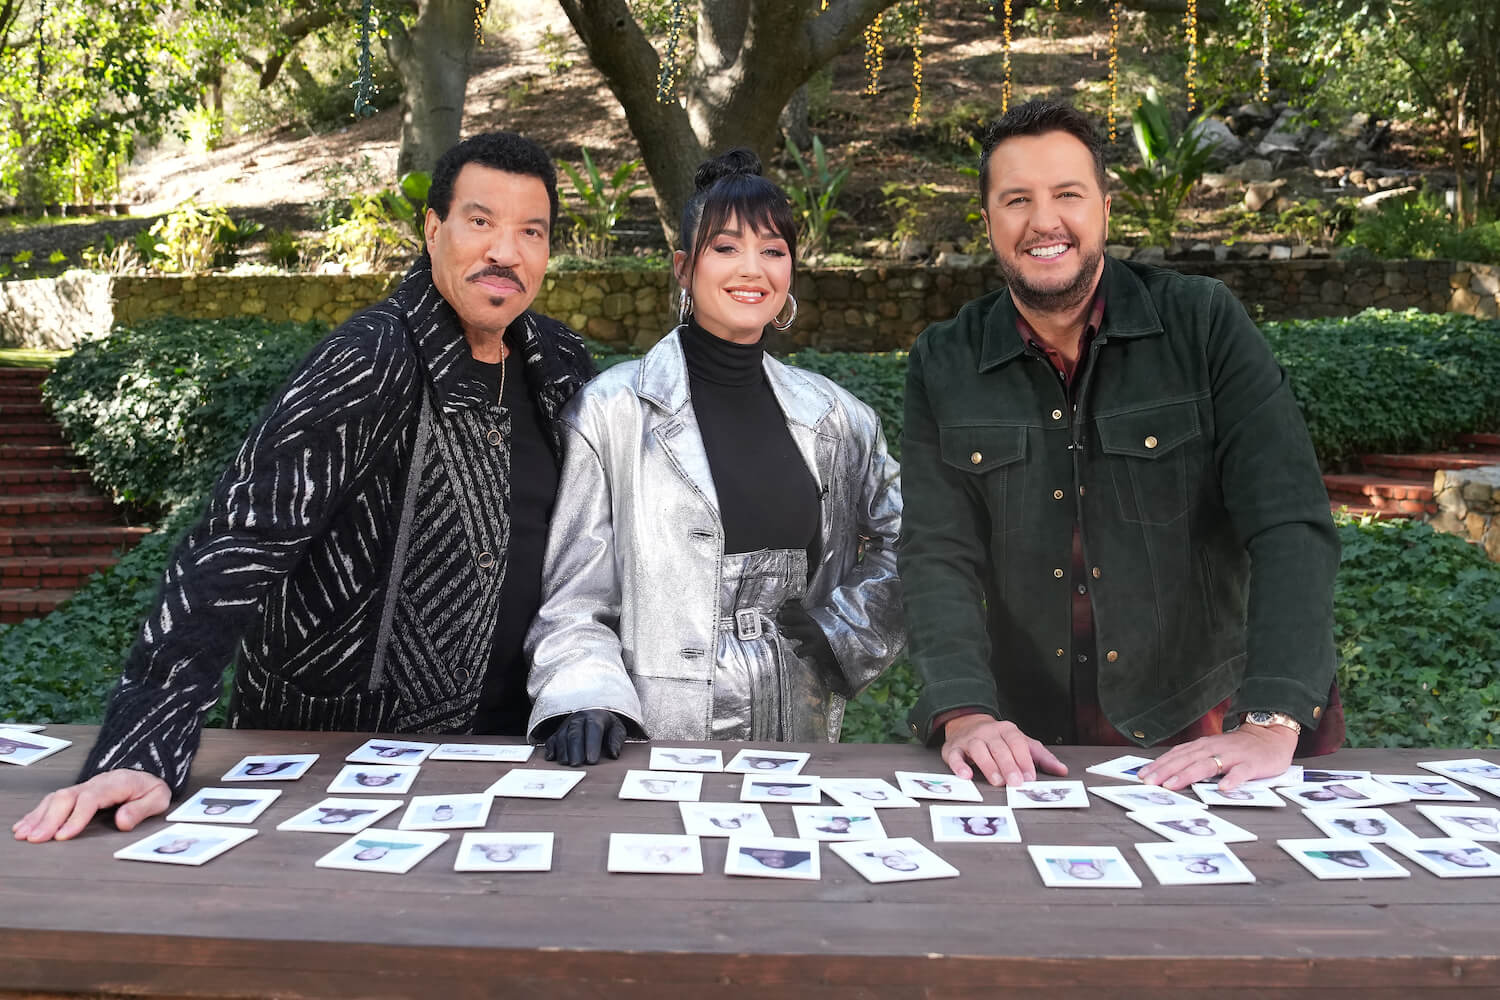 'American Idol' judges Lionel Richie, Katy Perry, and Luke Bryan smiling while outdoors